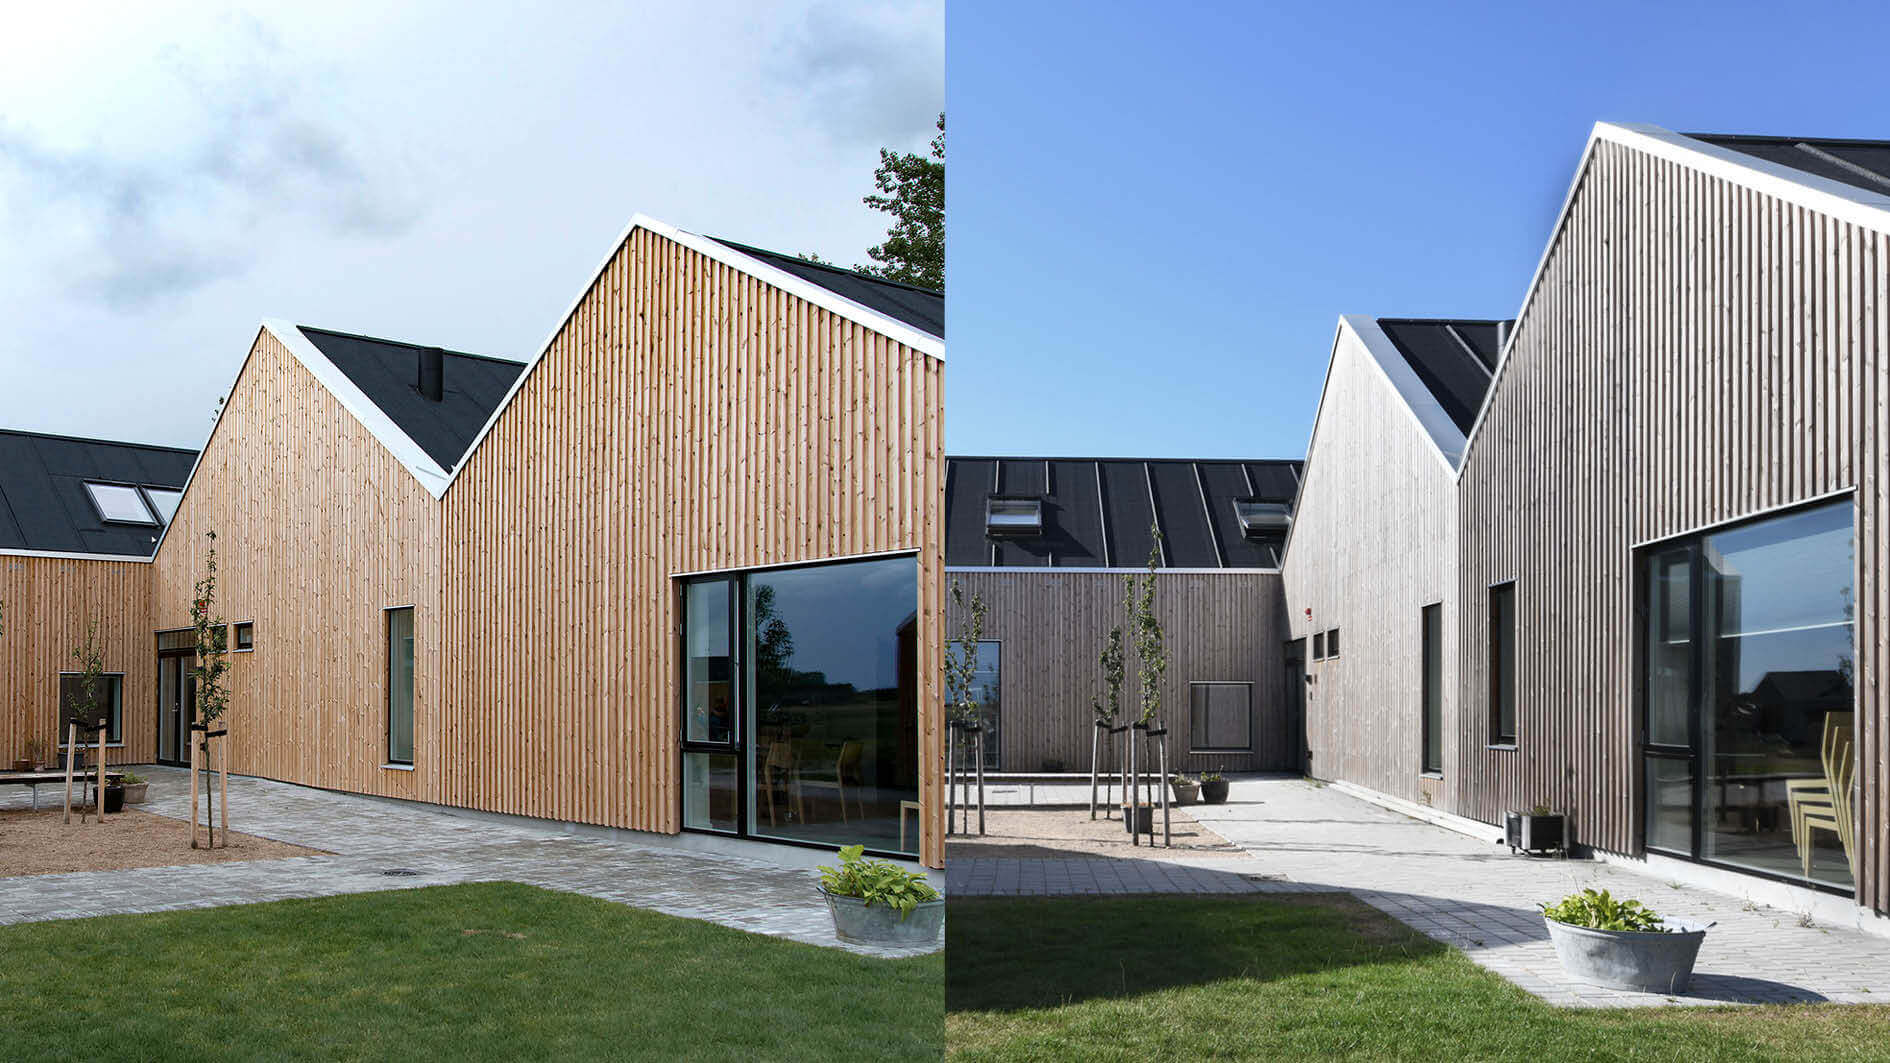 Image showing the same building in Denmark 3 years apart to demonstrate the natural graying of Lunawood Thermowood over time